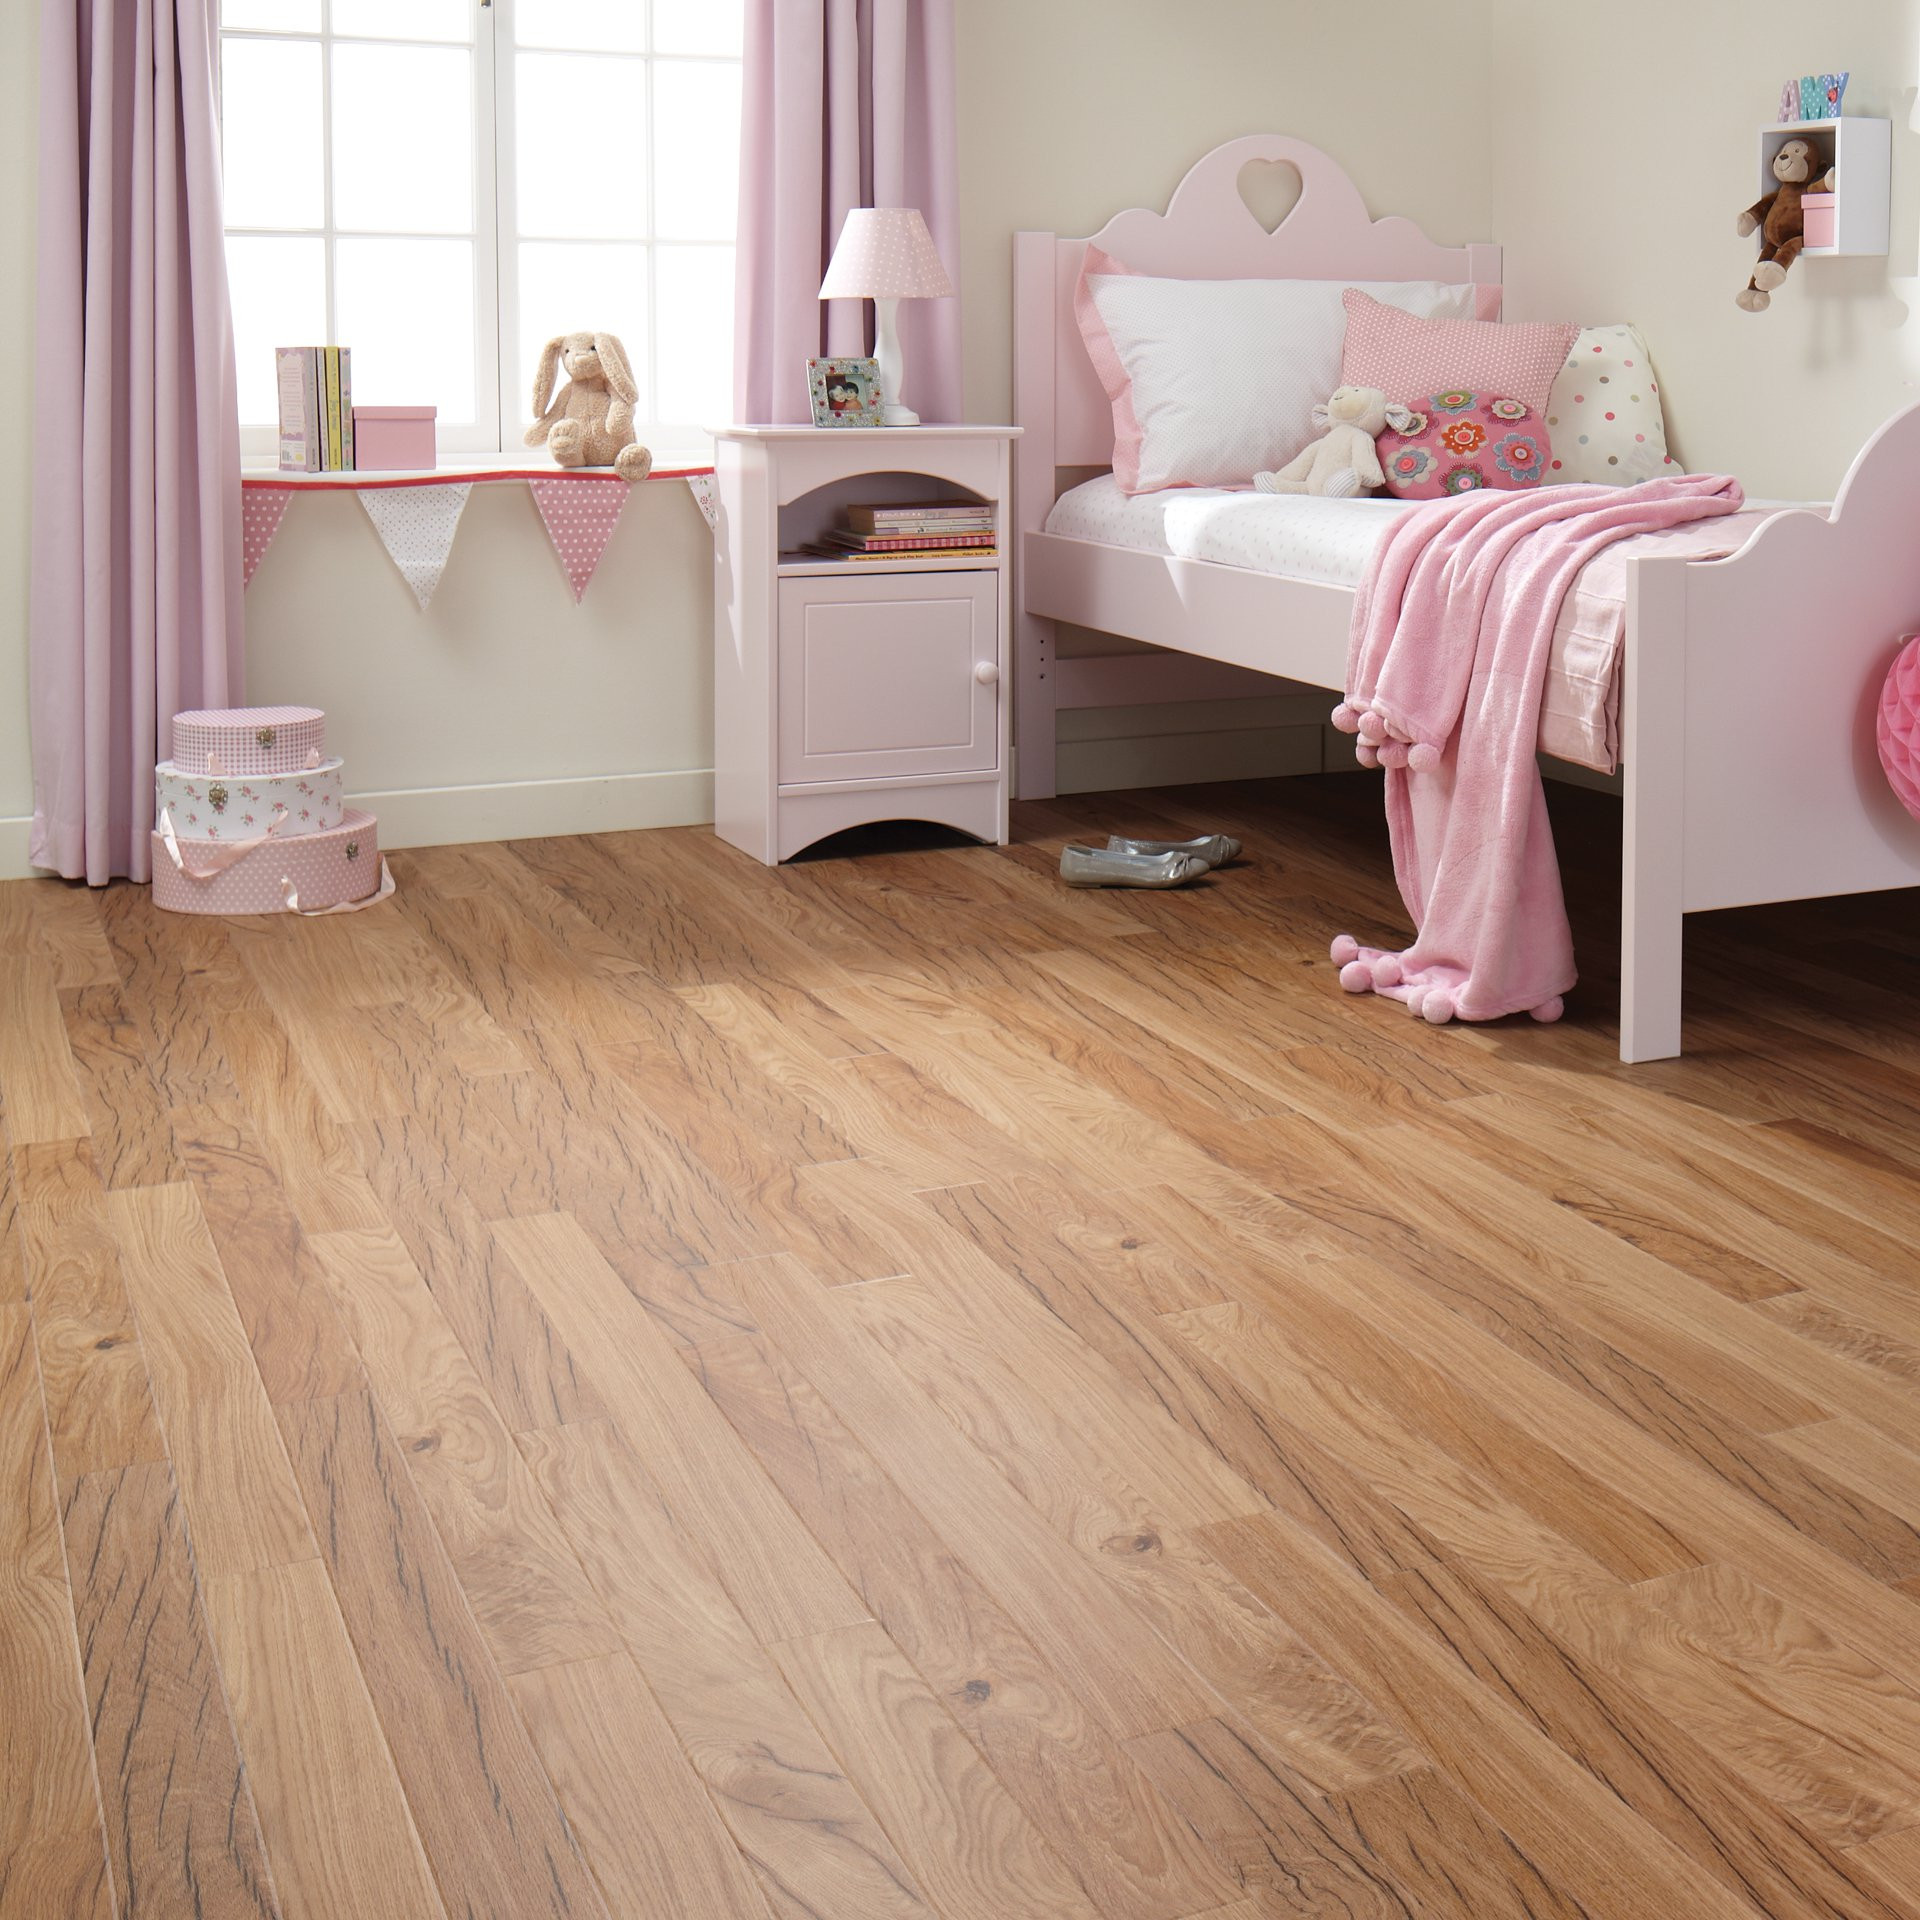 Floor for Kids Room Luxury Kids Rooms Flooring Ideas for Your Home